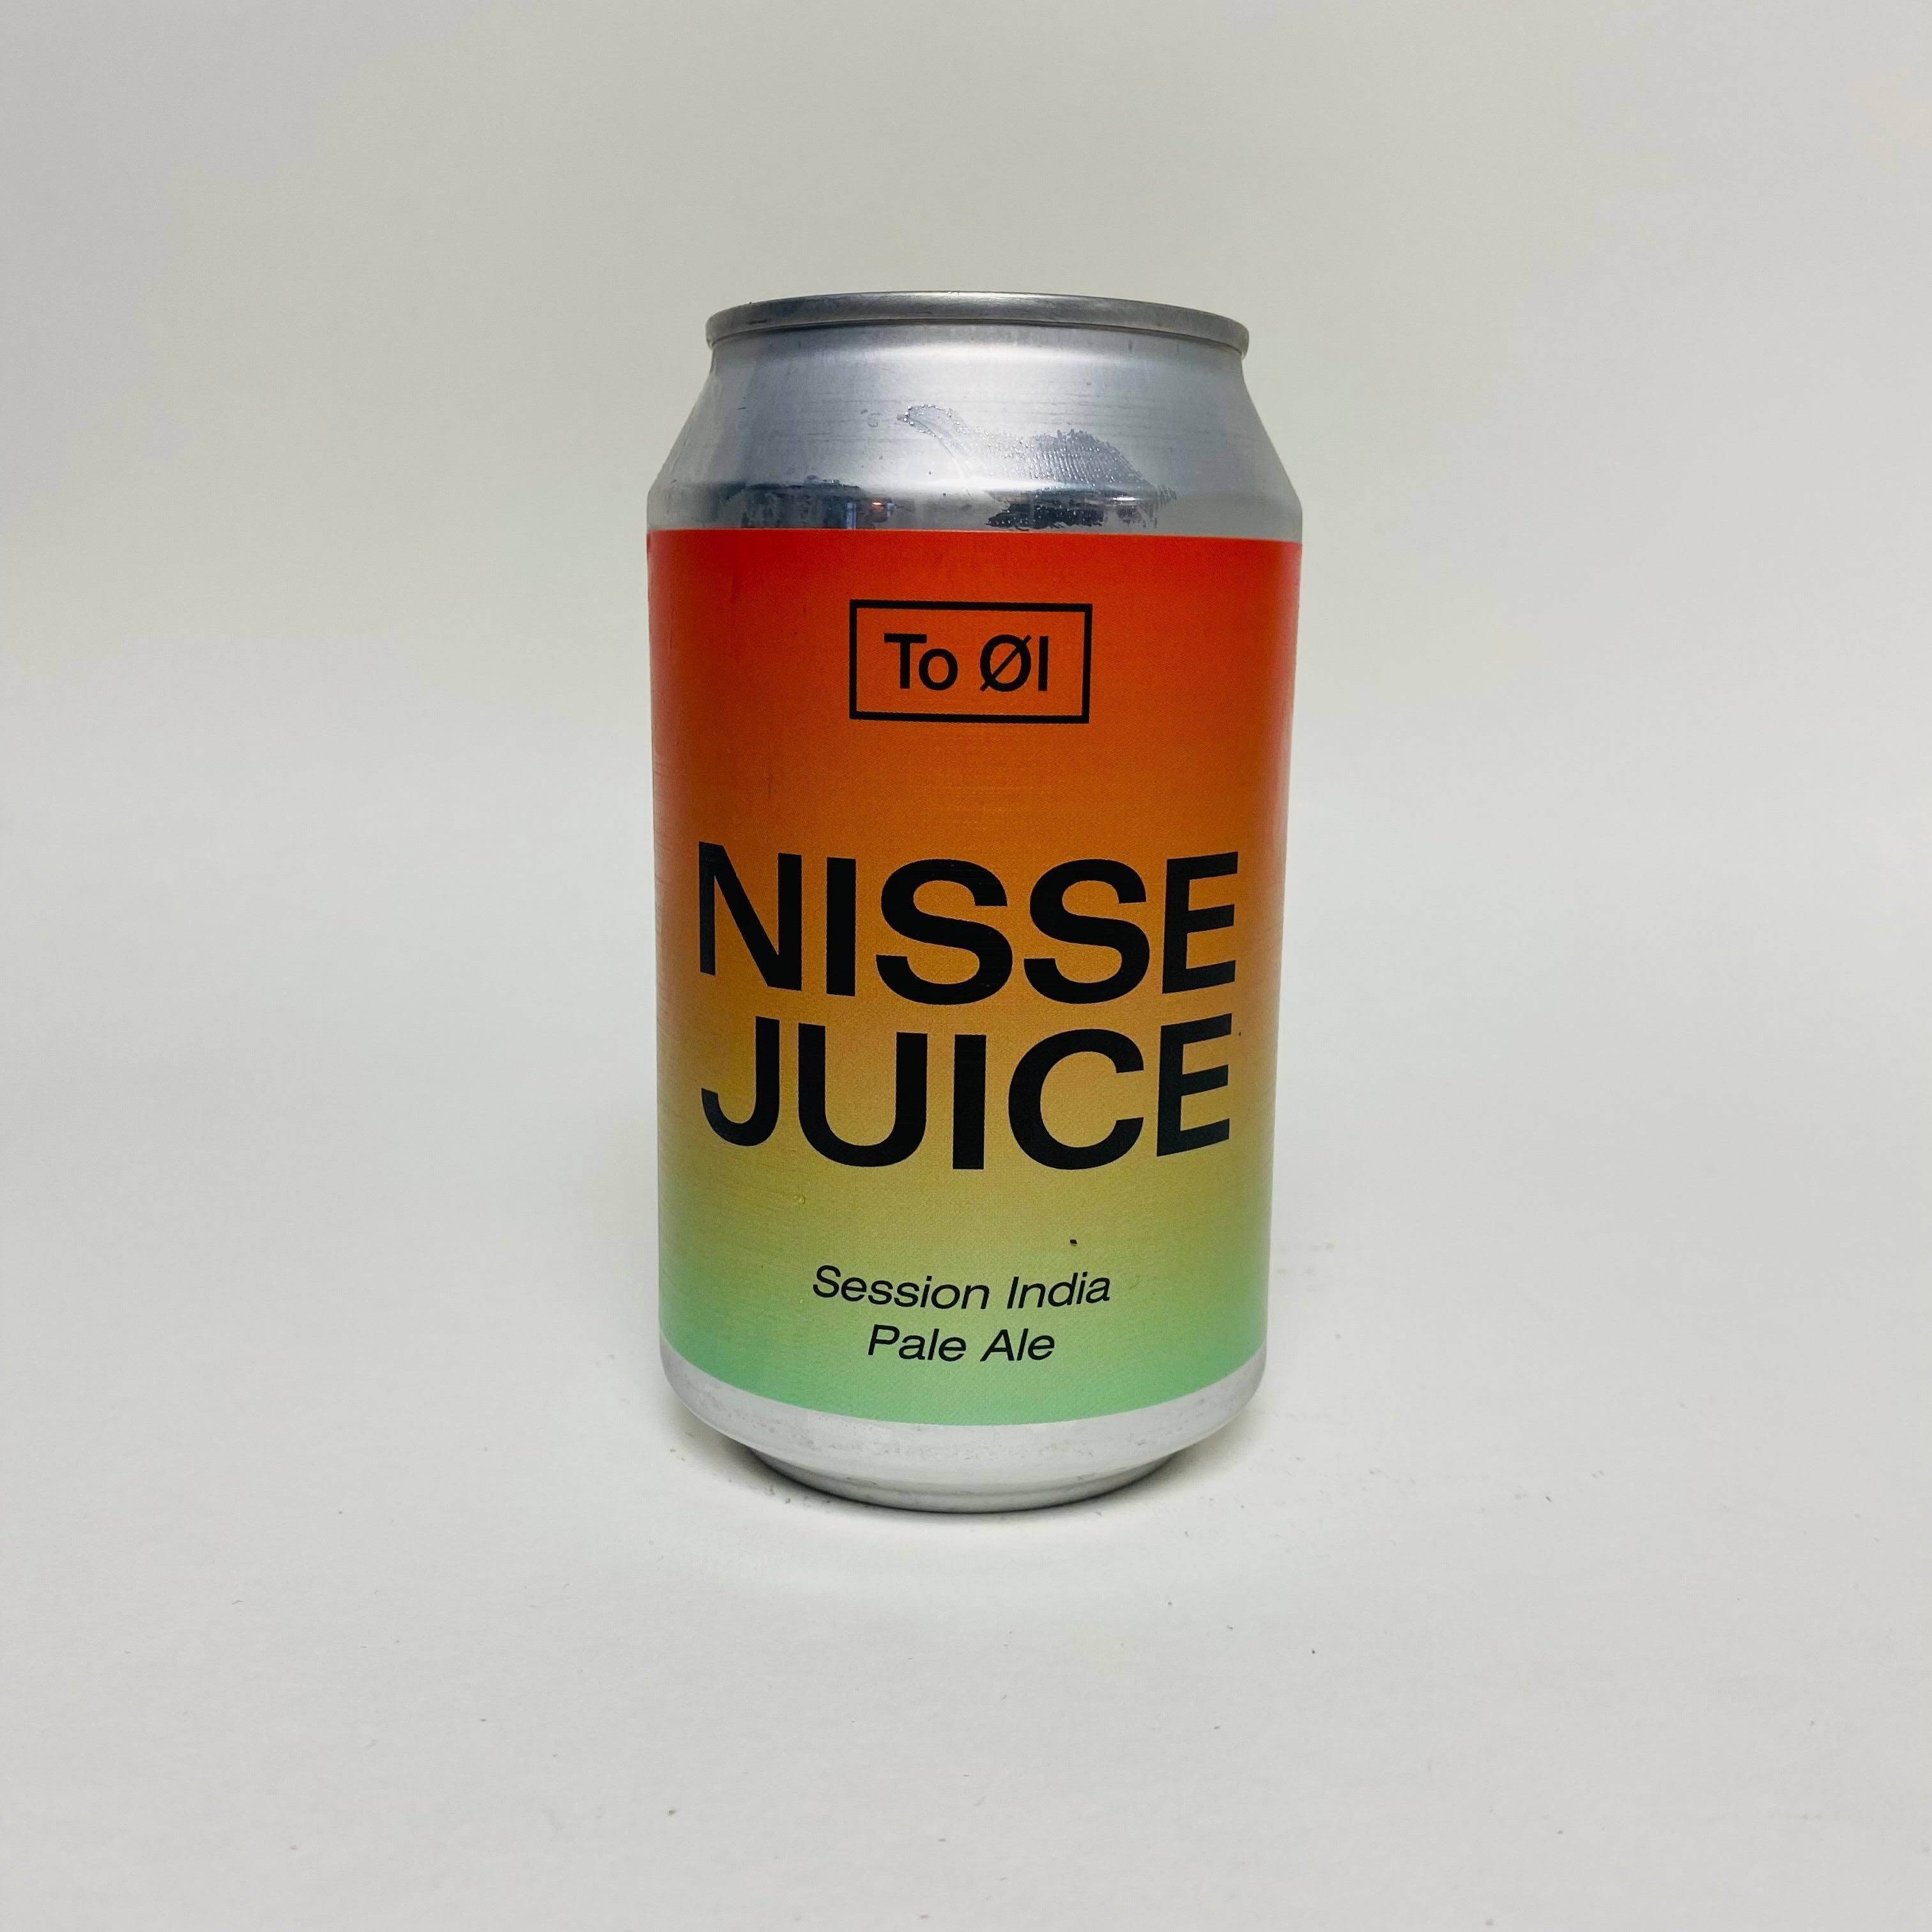 To Ol Nisse Juice Gluten Free Session Ipa 33Cl 4.6%